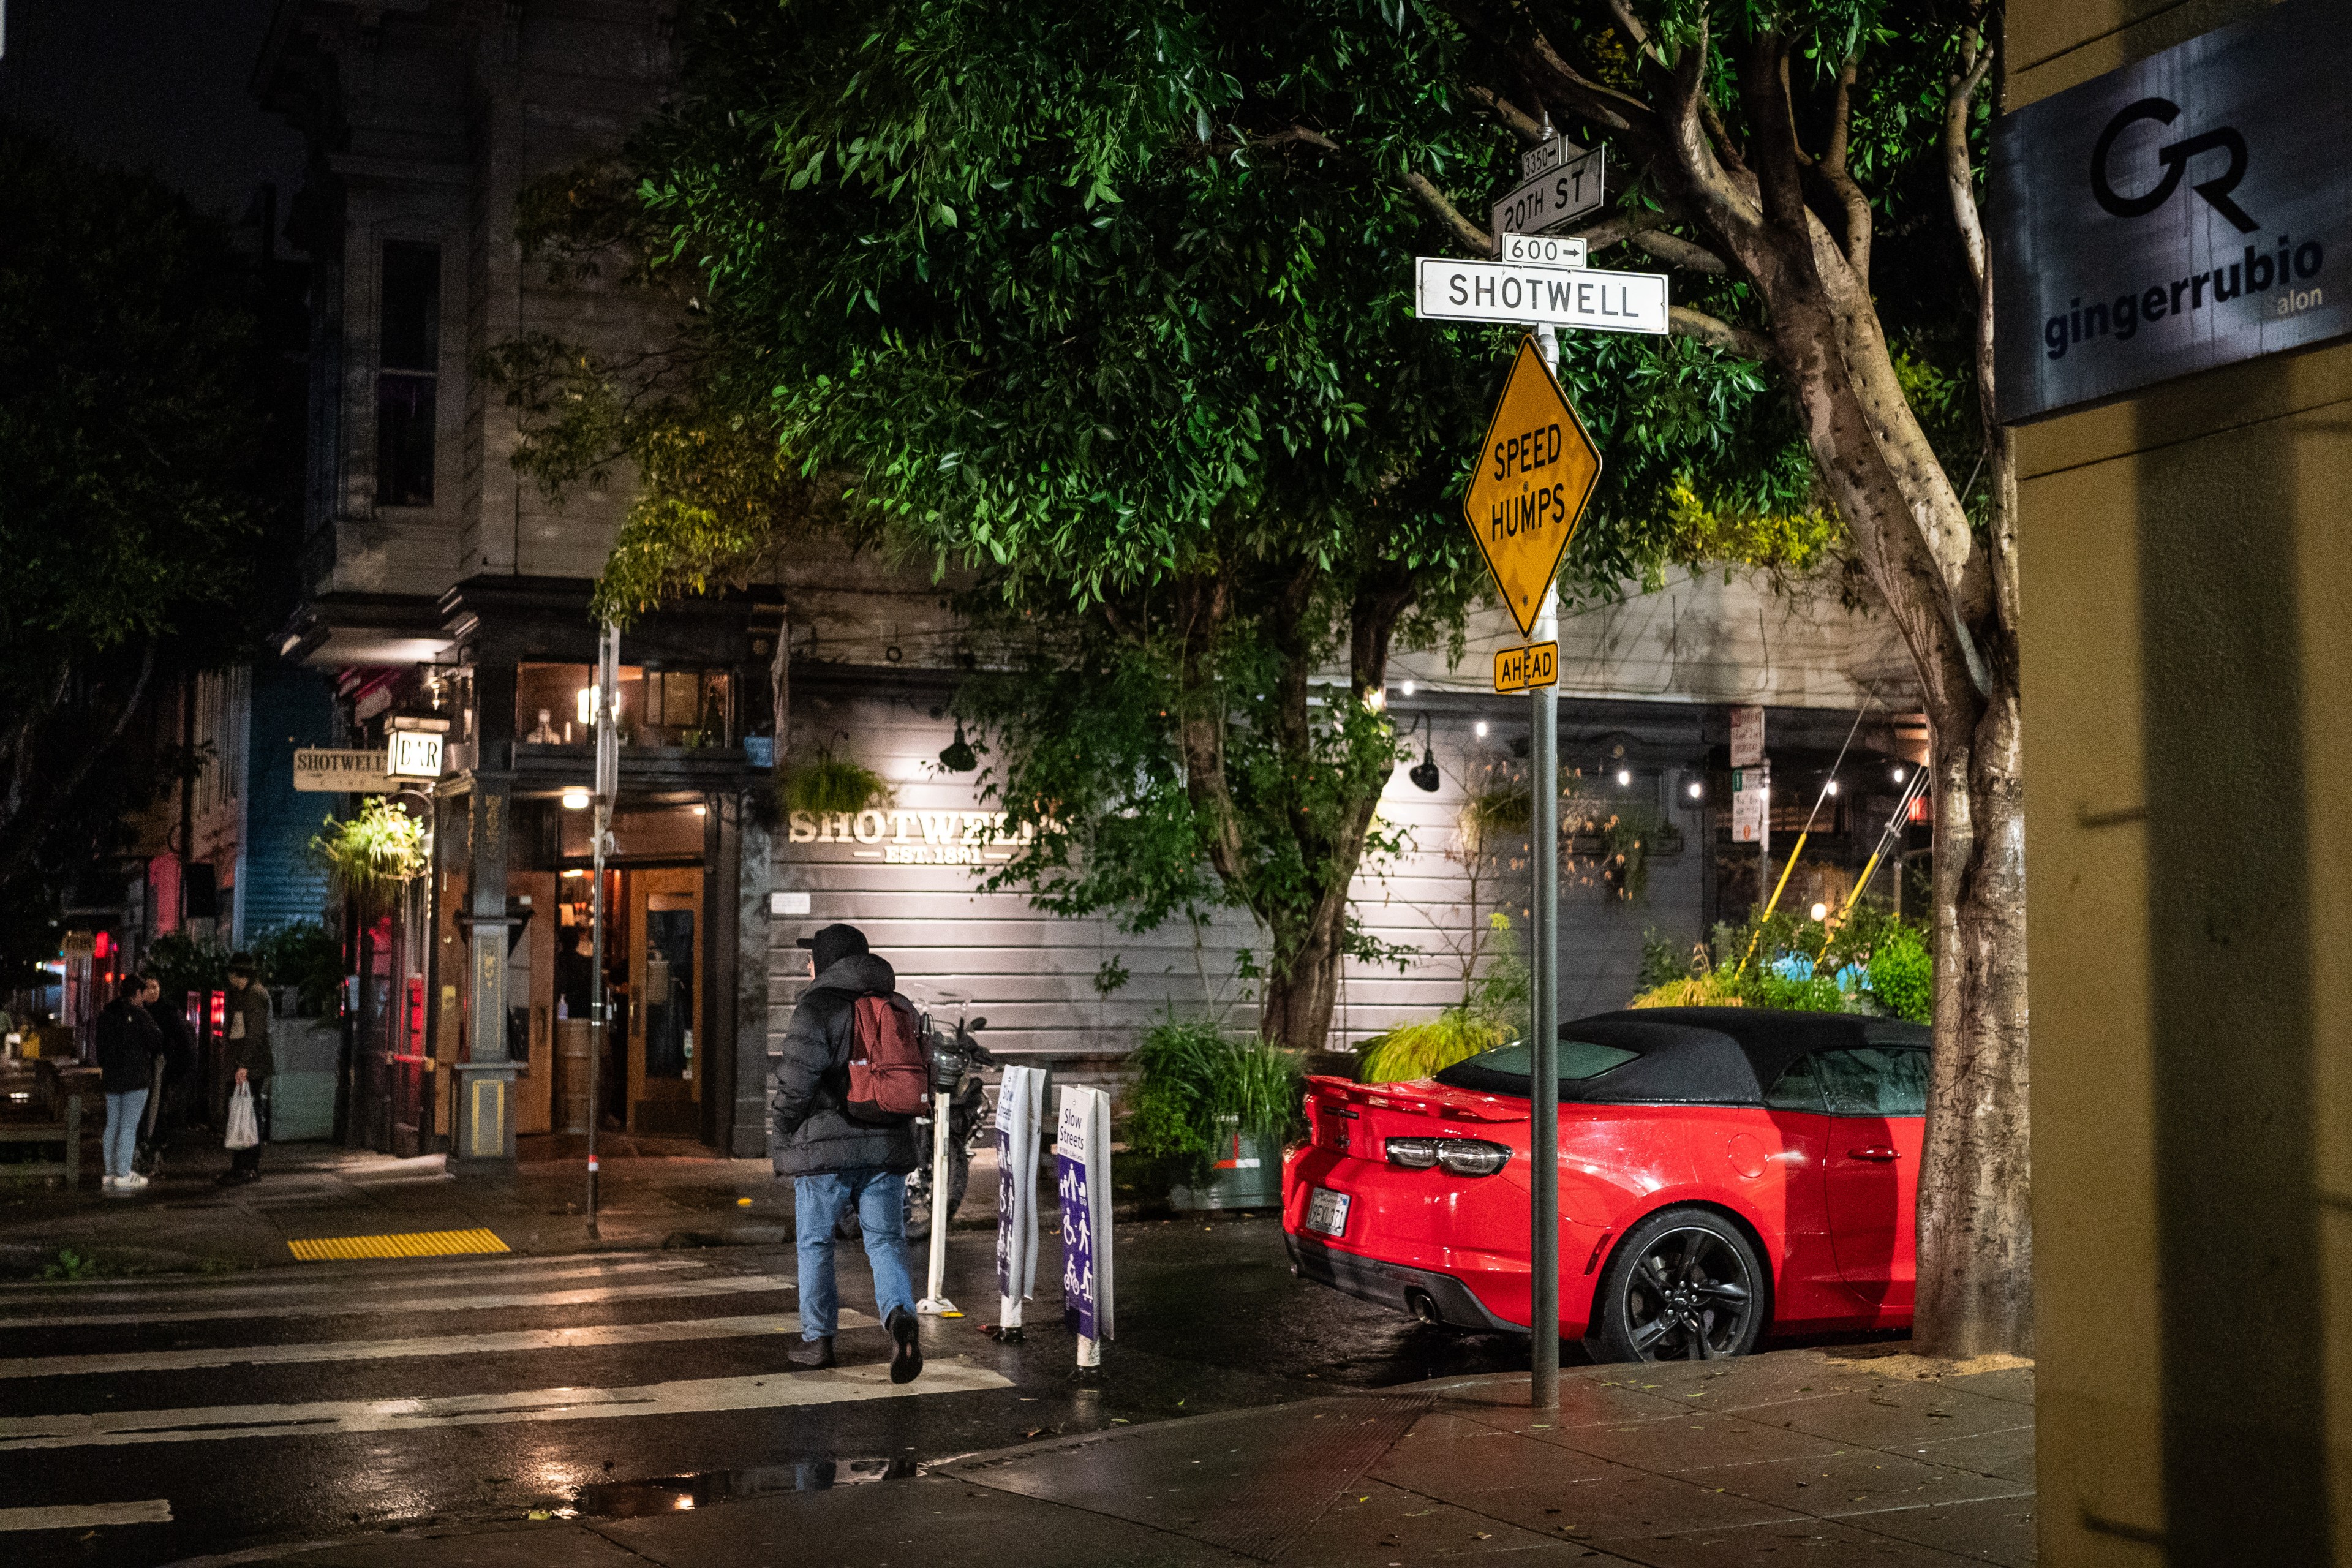 A rainy city corner at night with a pedestrian, a red car, and street signs, including one for Shotwell Street.